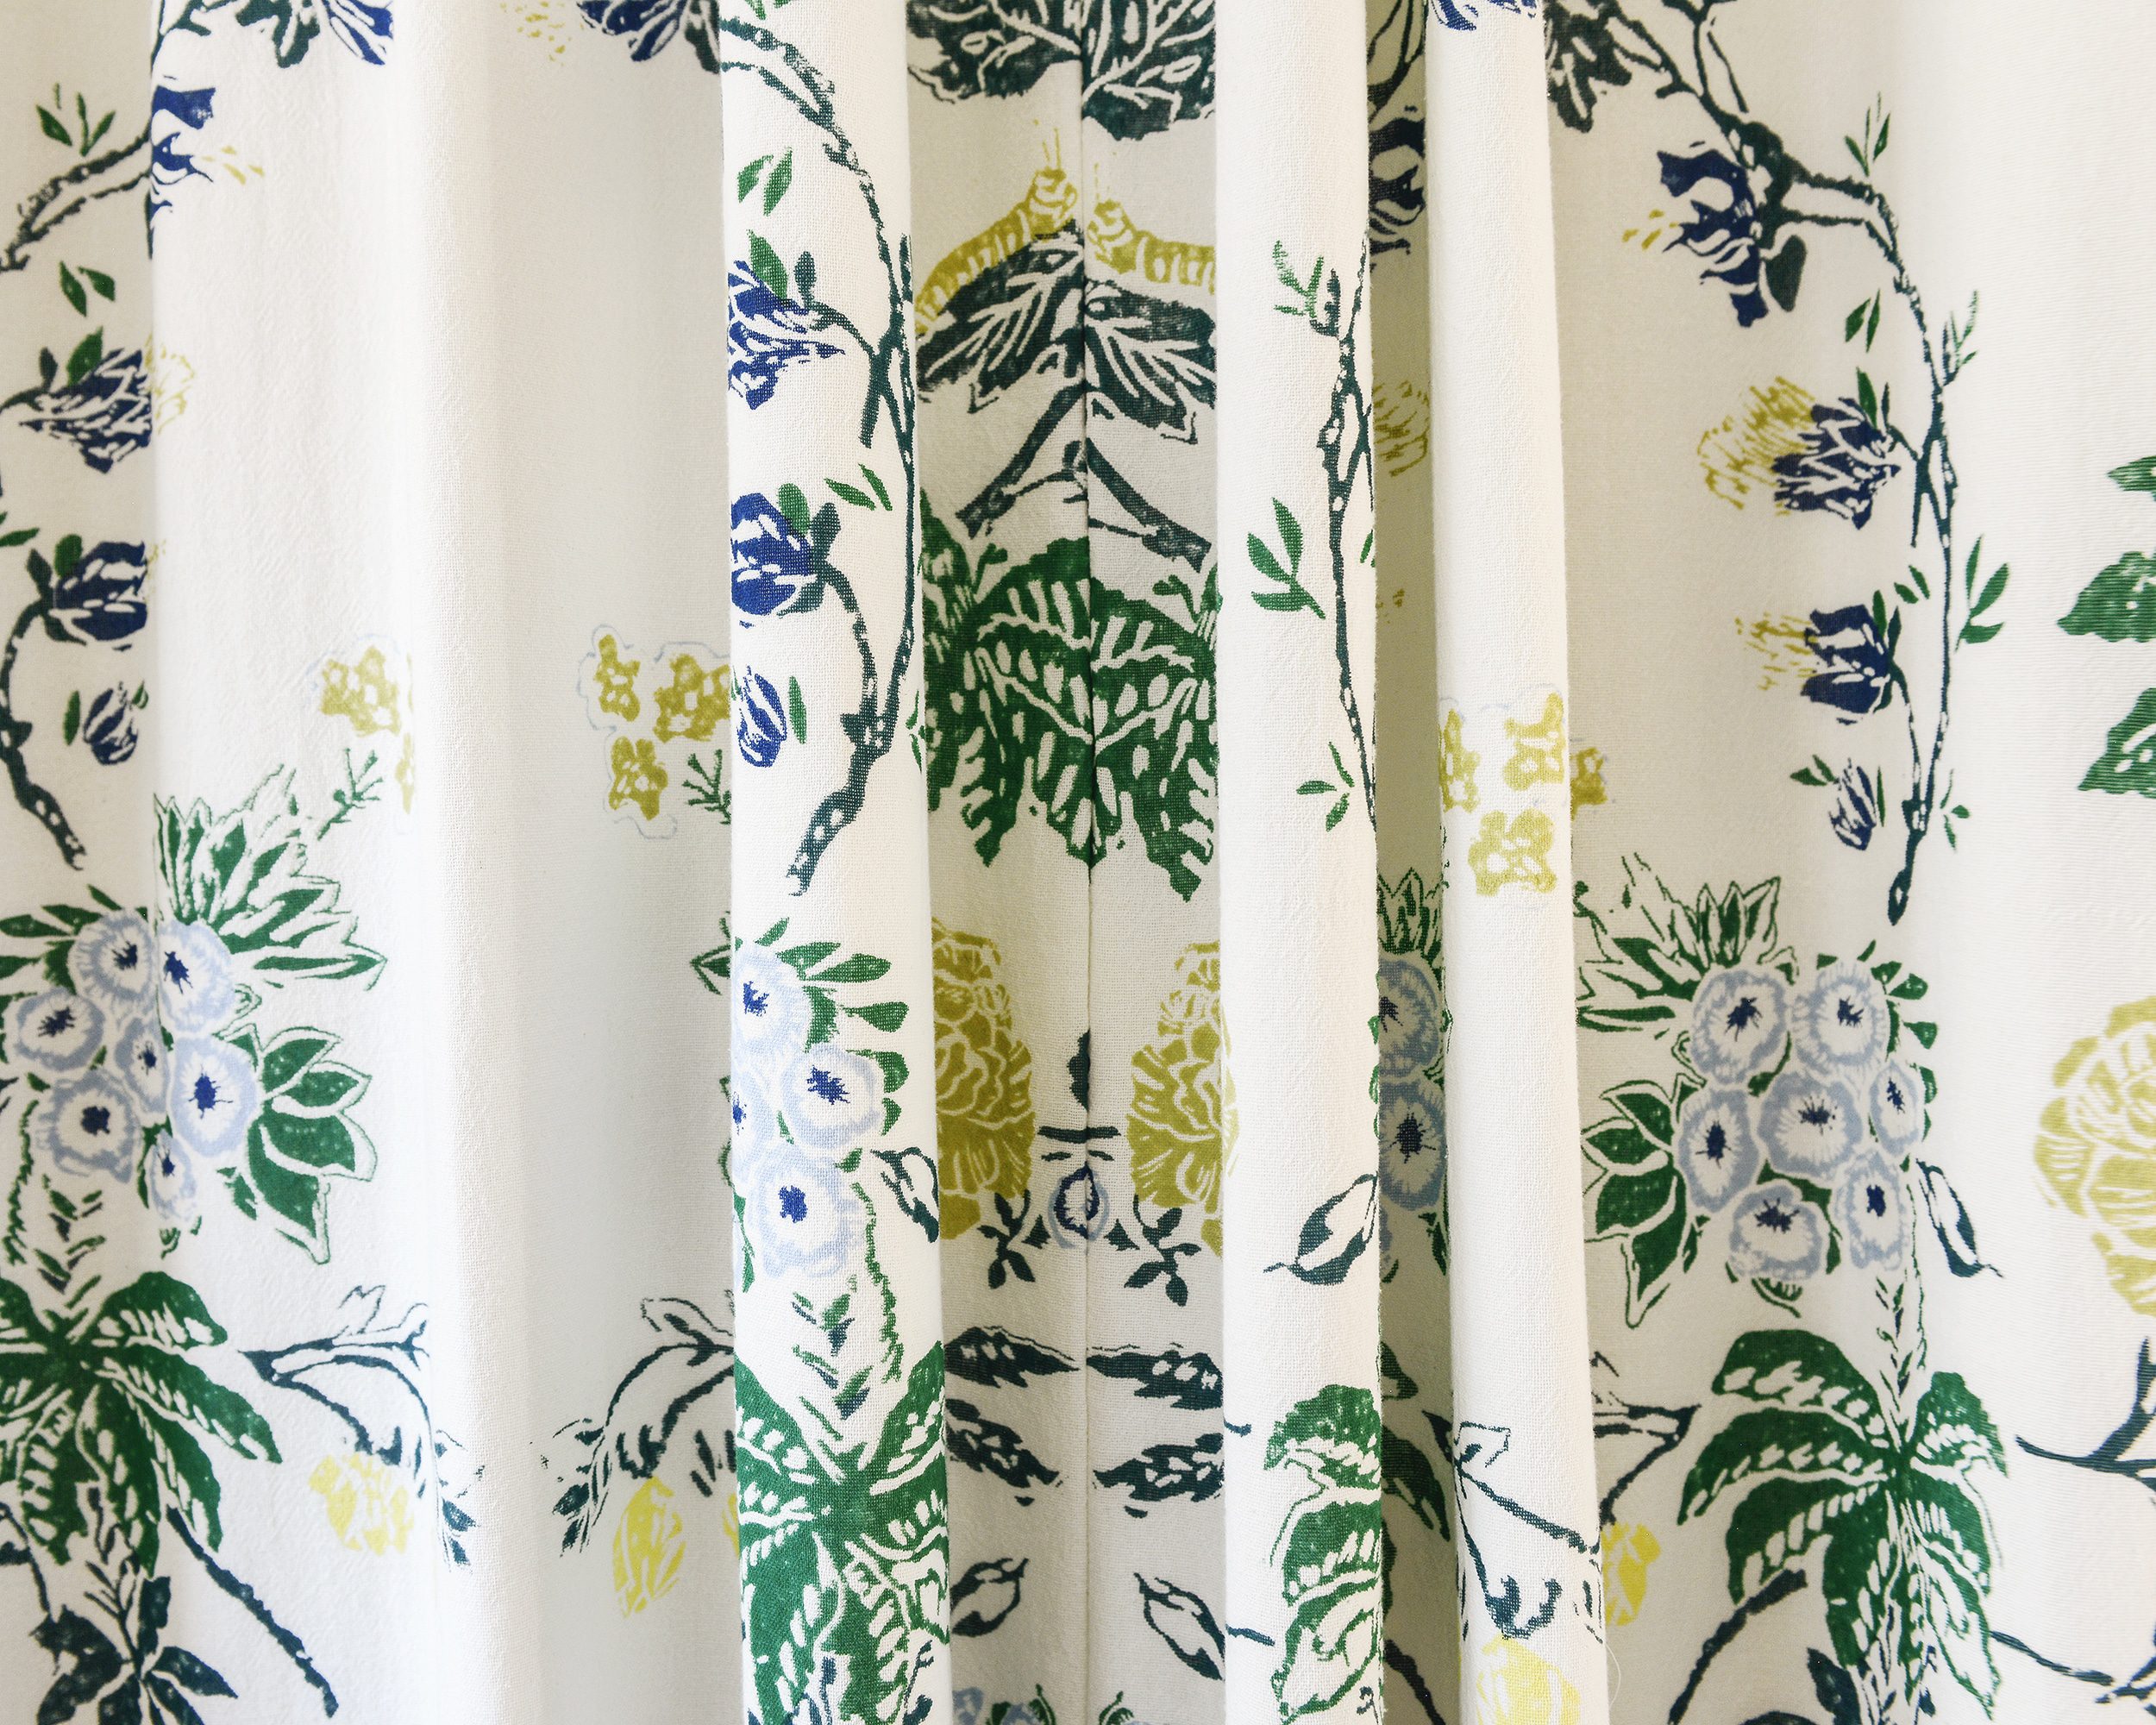 A close-up of our curtain panels that were seamed together to make a shower curtain | via Yellow Brick Home